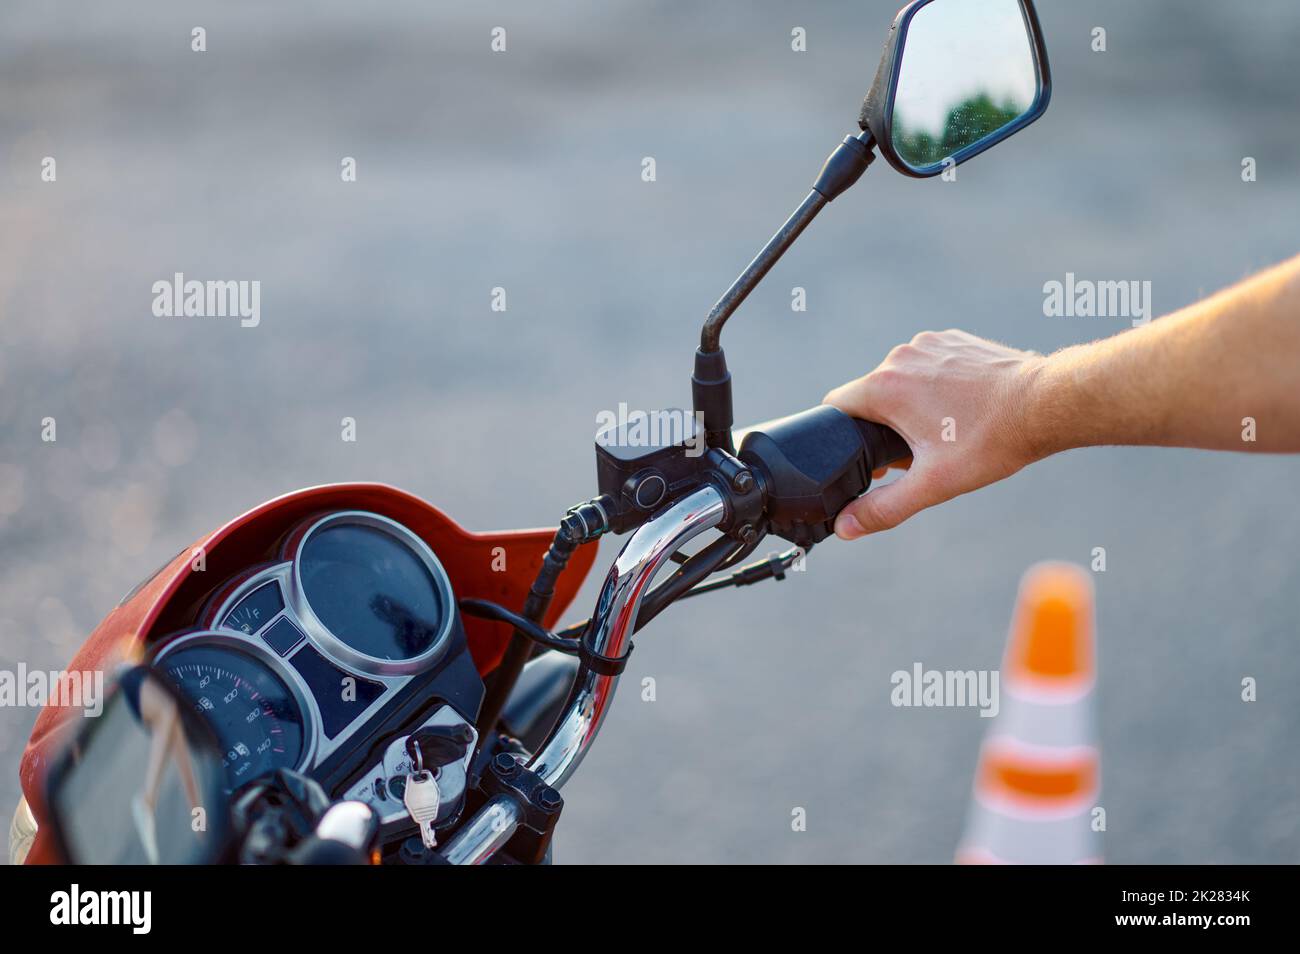 Male person on motorbike, motorcycle school Stock Photo